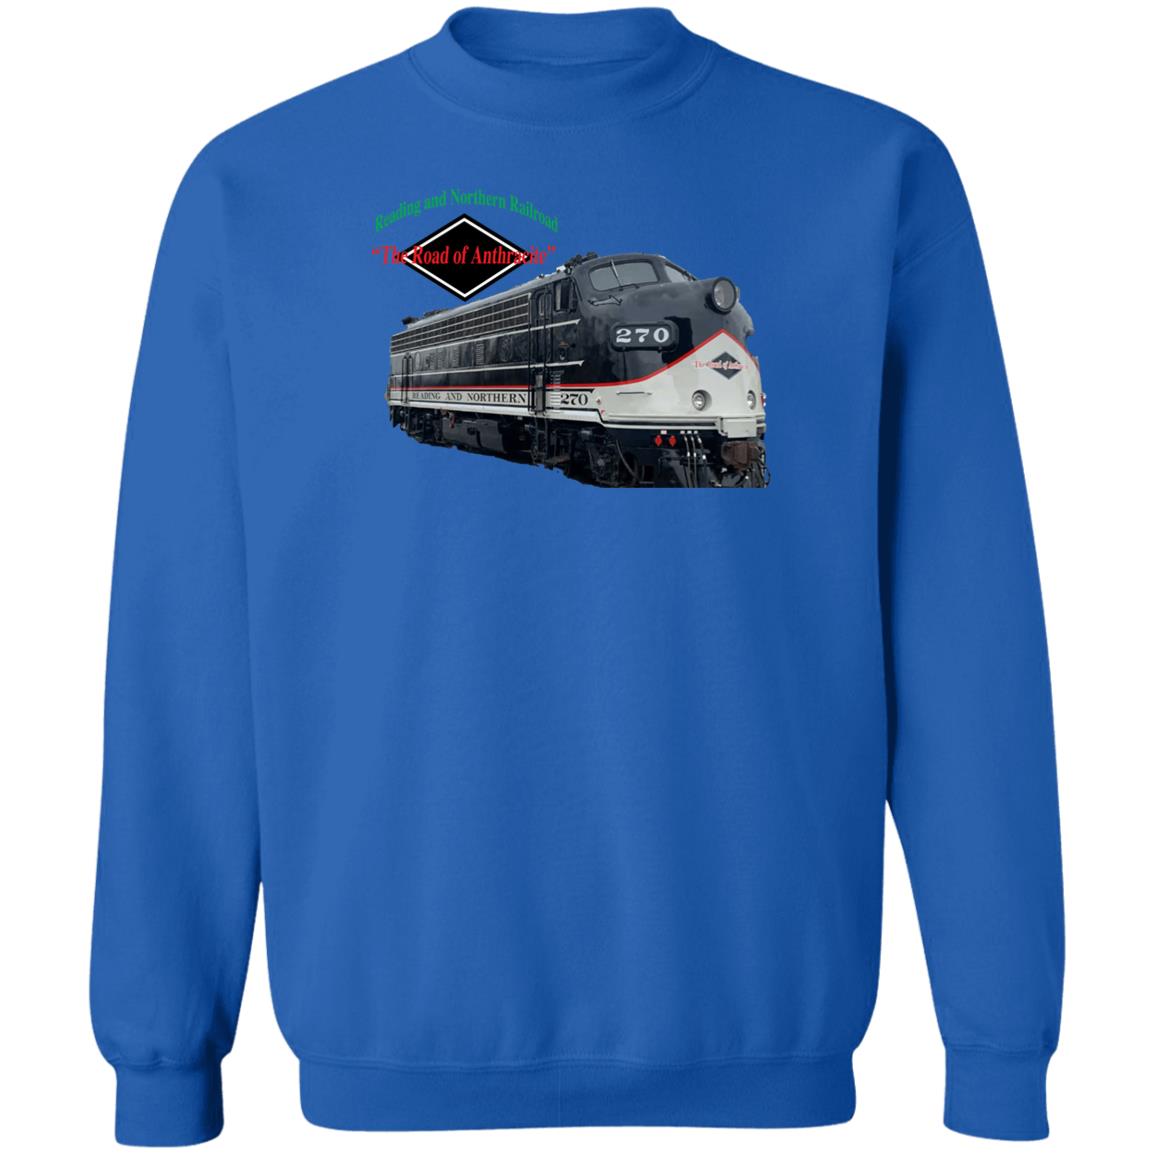 Reading Blue Mountain & Northern “The Road of Anthracite” Crewneck Pullover Sweatshirt - Broken Knuckle Apparel